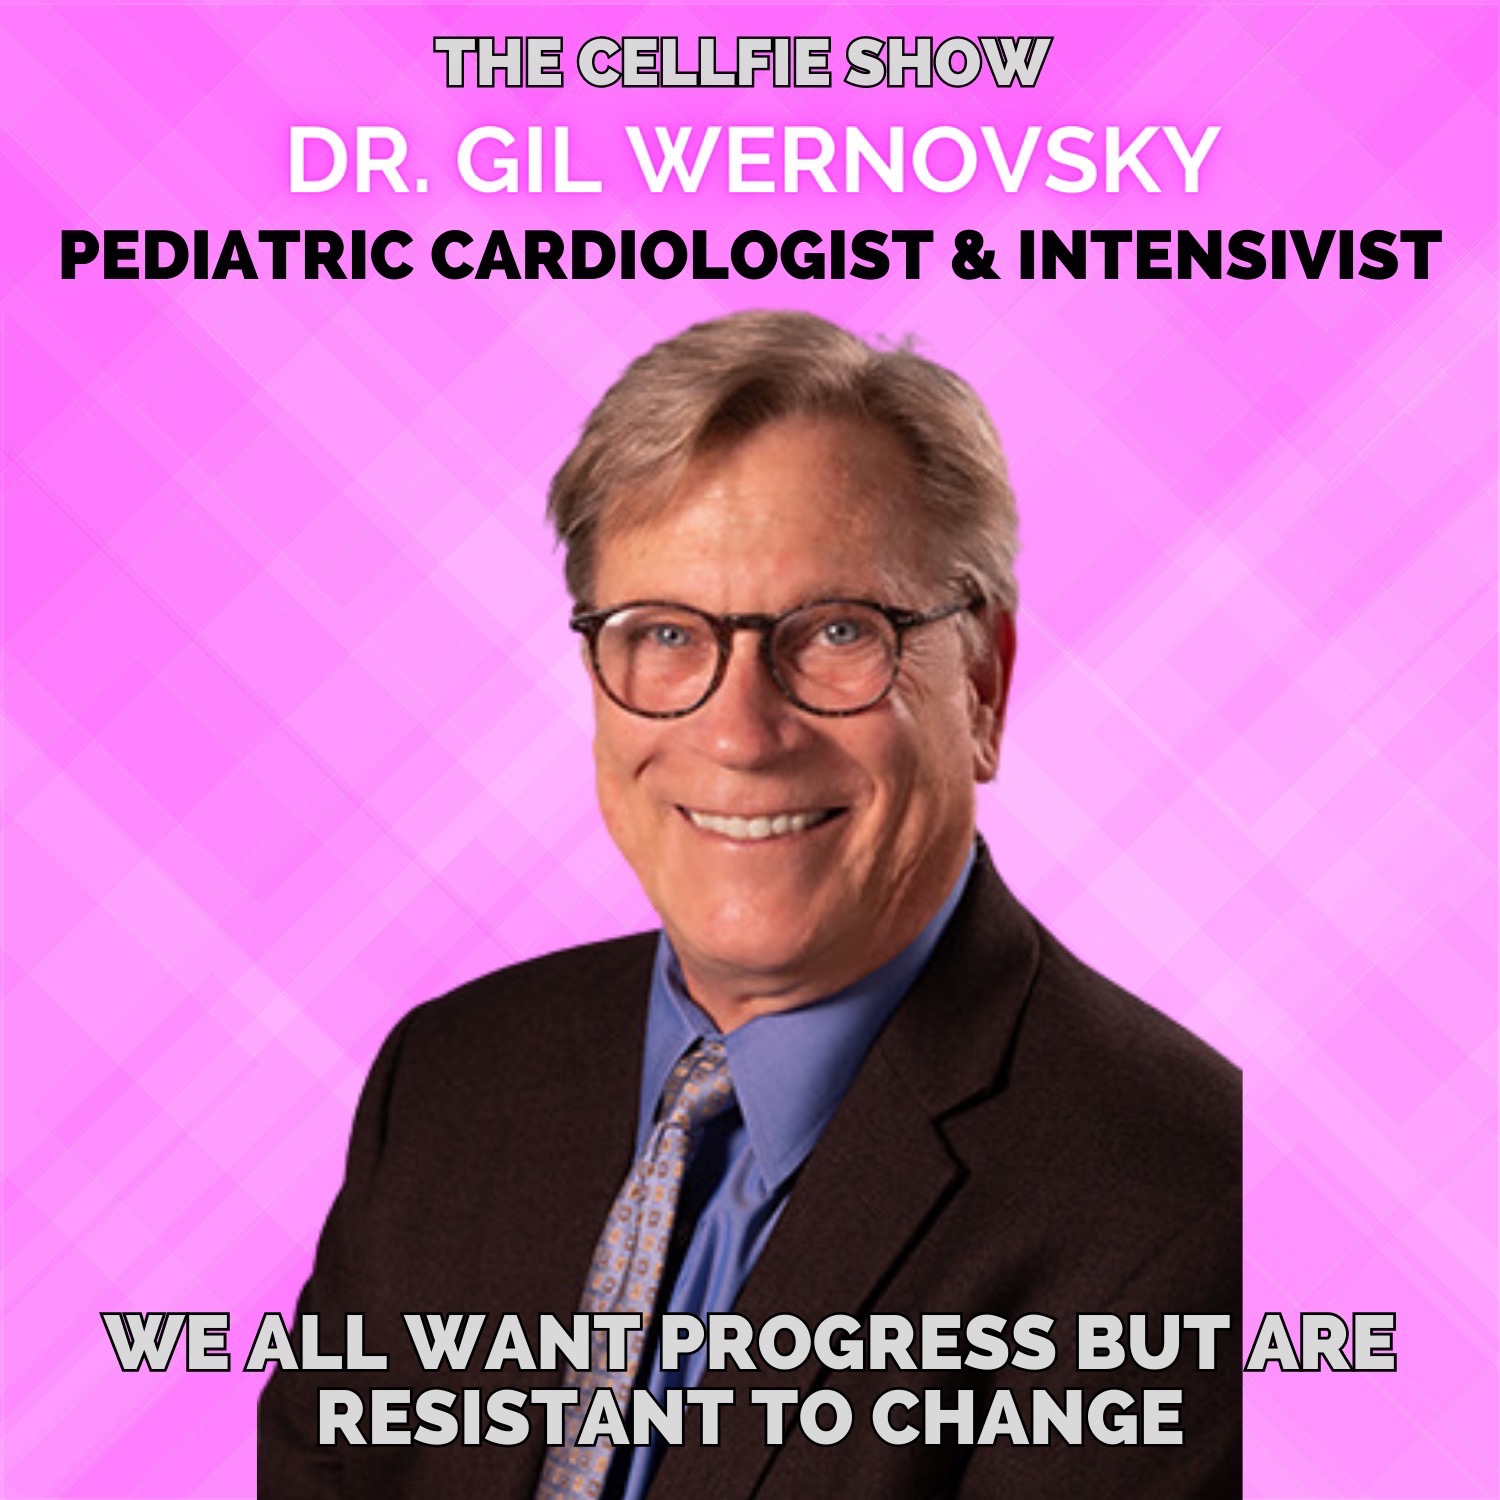 We Want Progress, But Are Resistant to Change with Dr. Gil Wernovsky. Pediatric Cardiology Legend + Co-Chair of World Congress. Open-Minded Practice + Dynamics of Successful Medical Teams